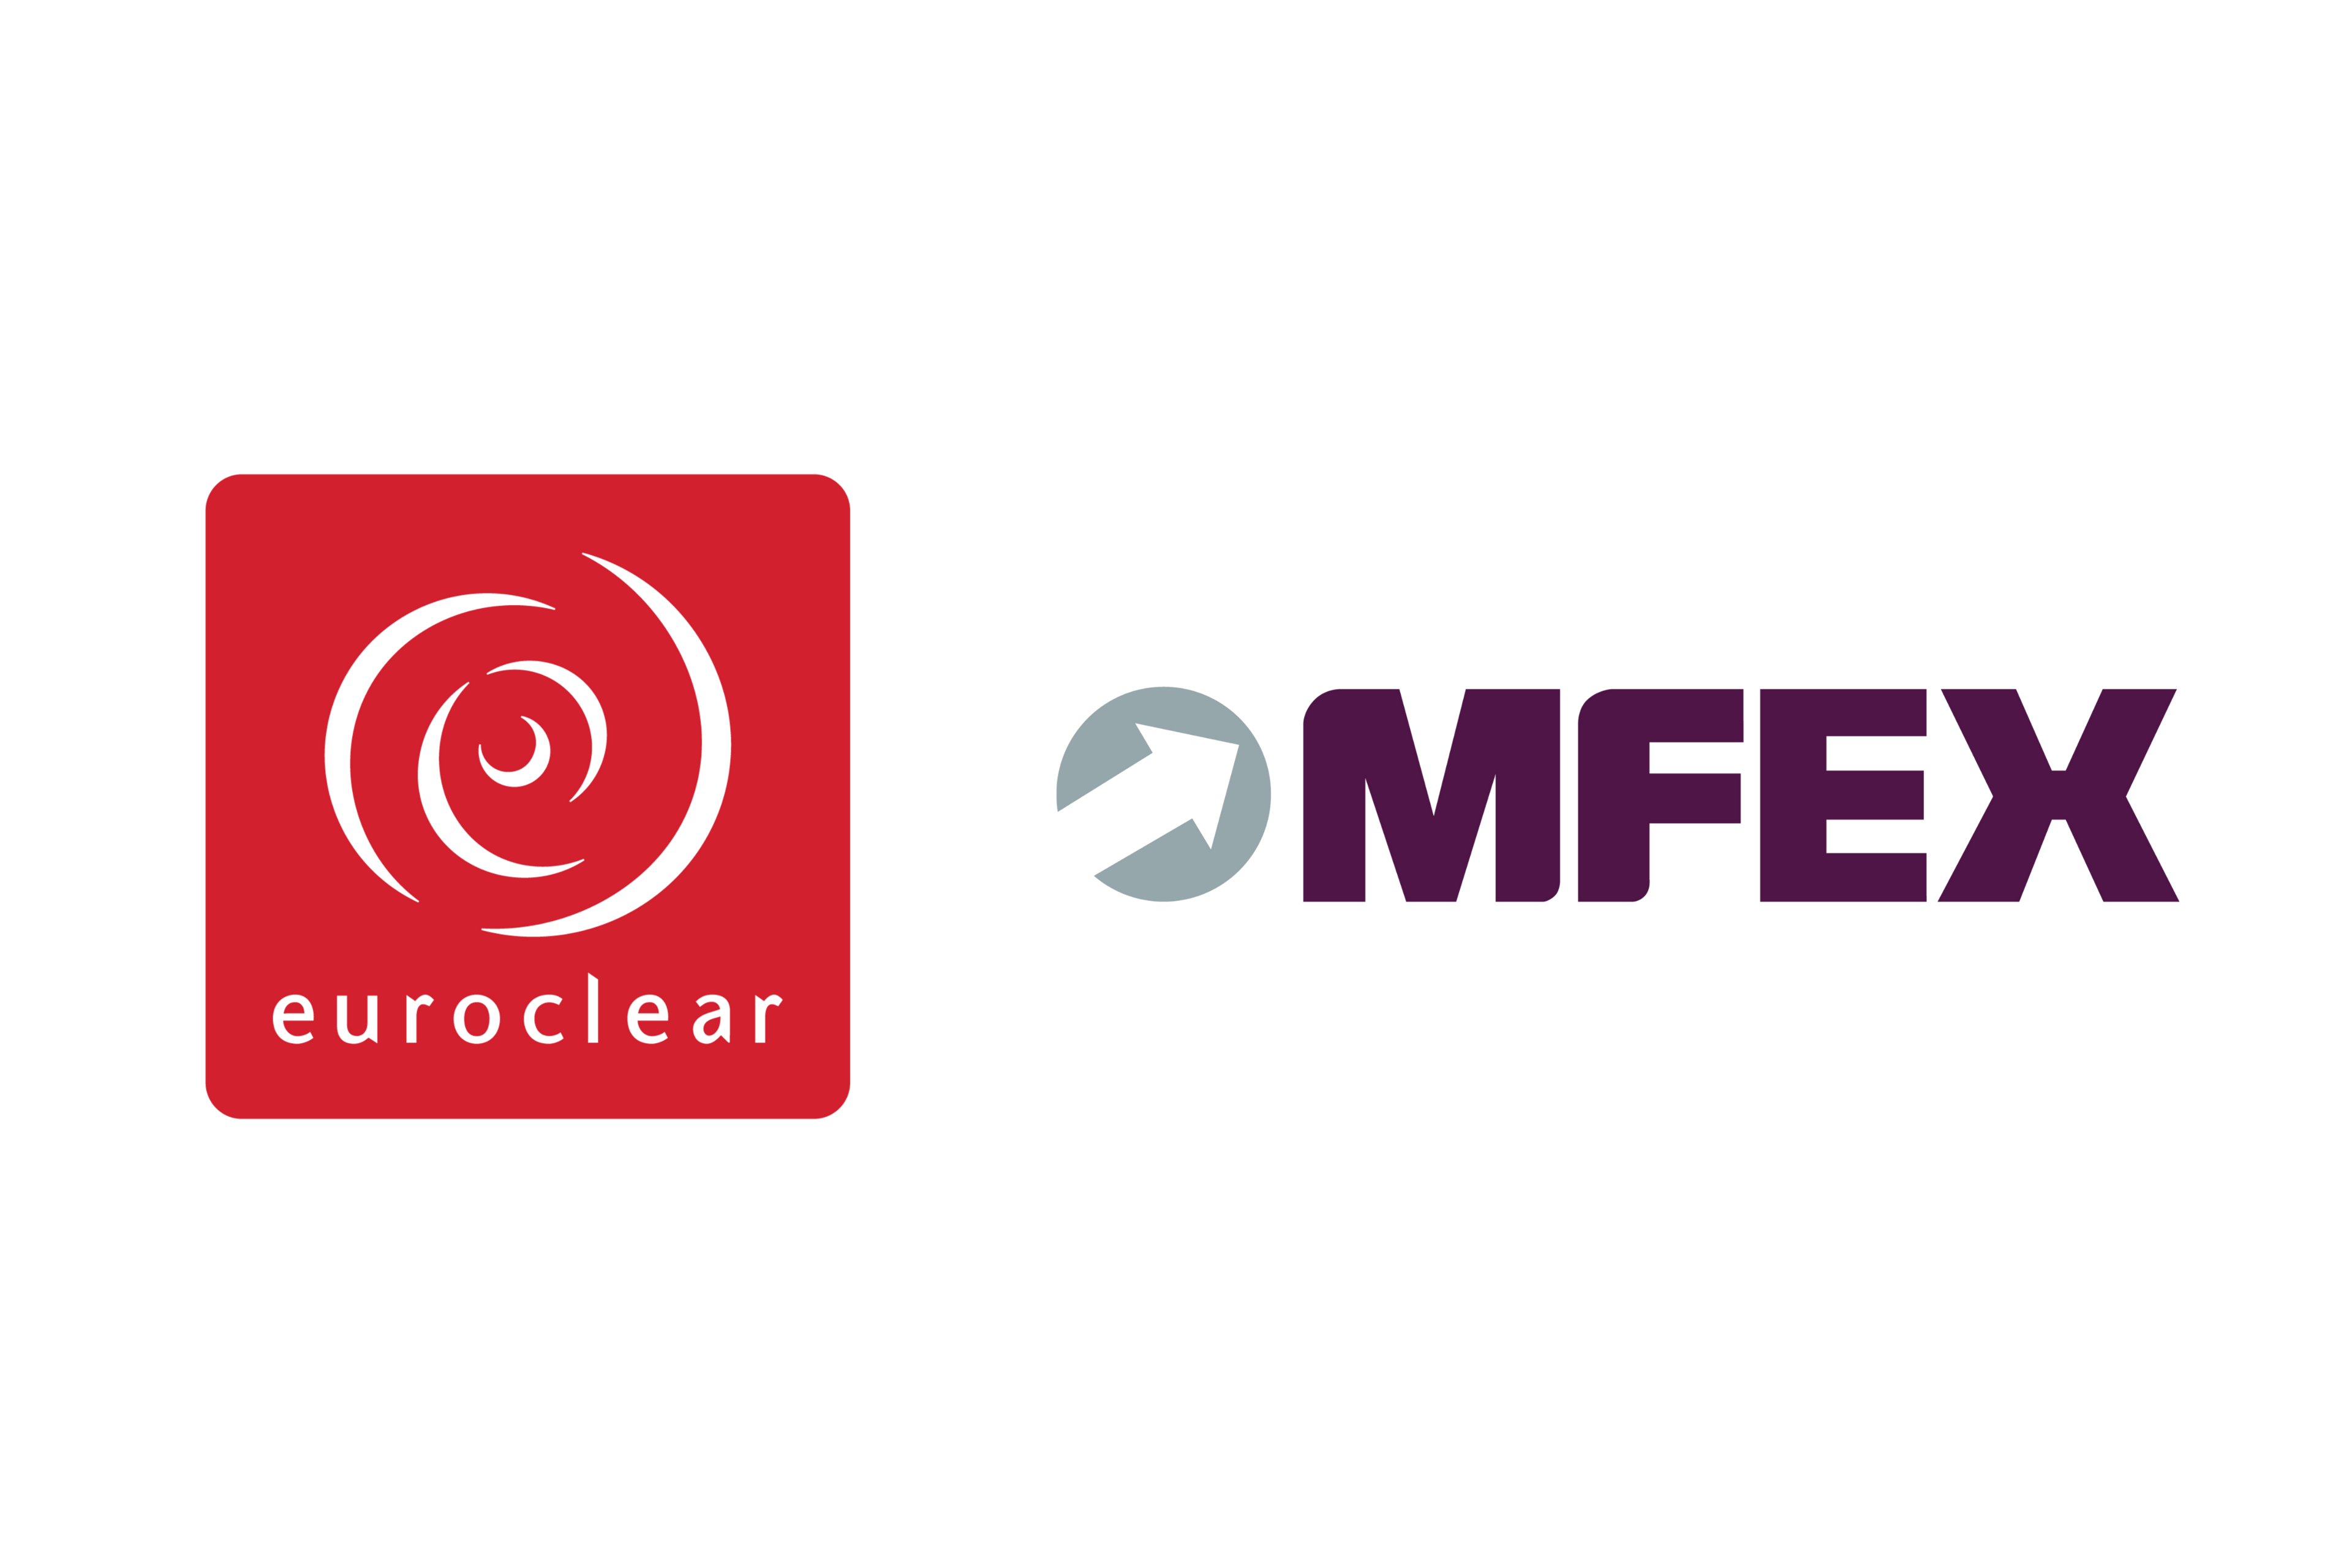 Euroclear completes the acquisition of MFEX Group